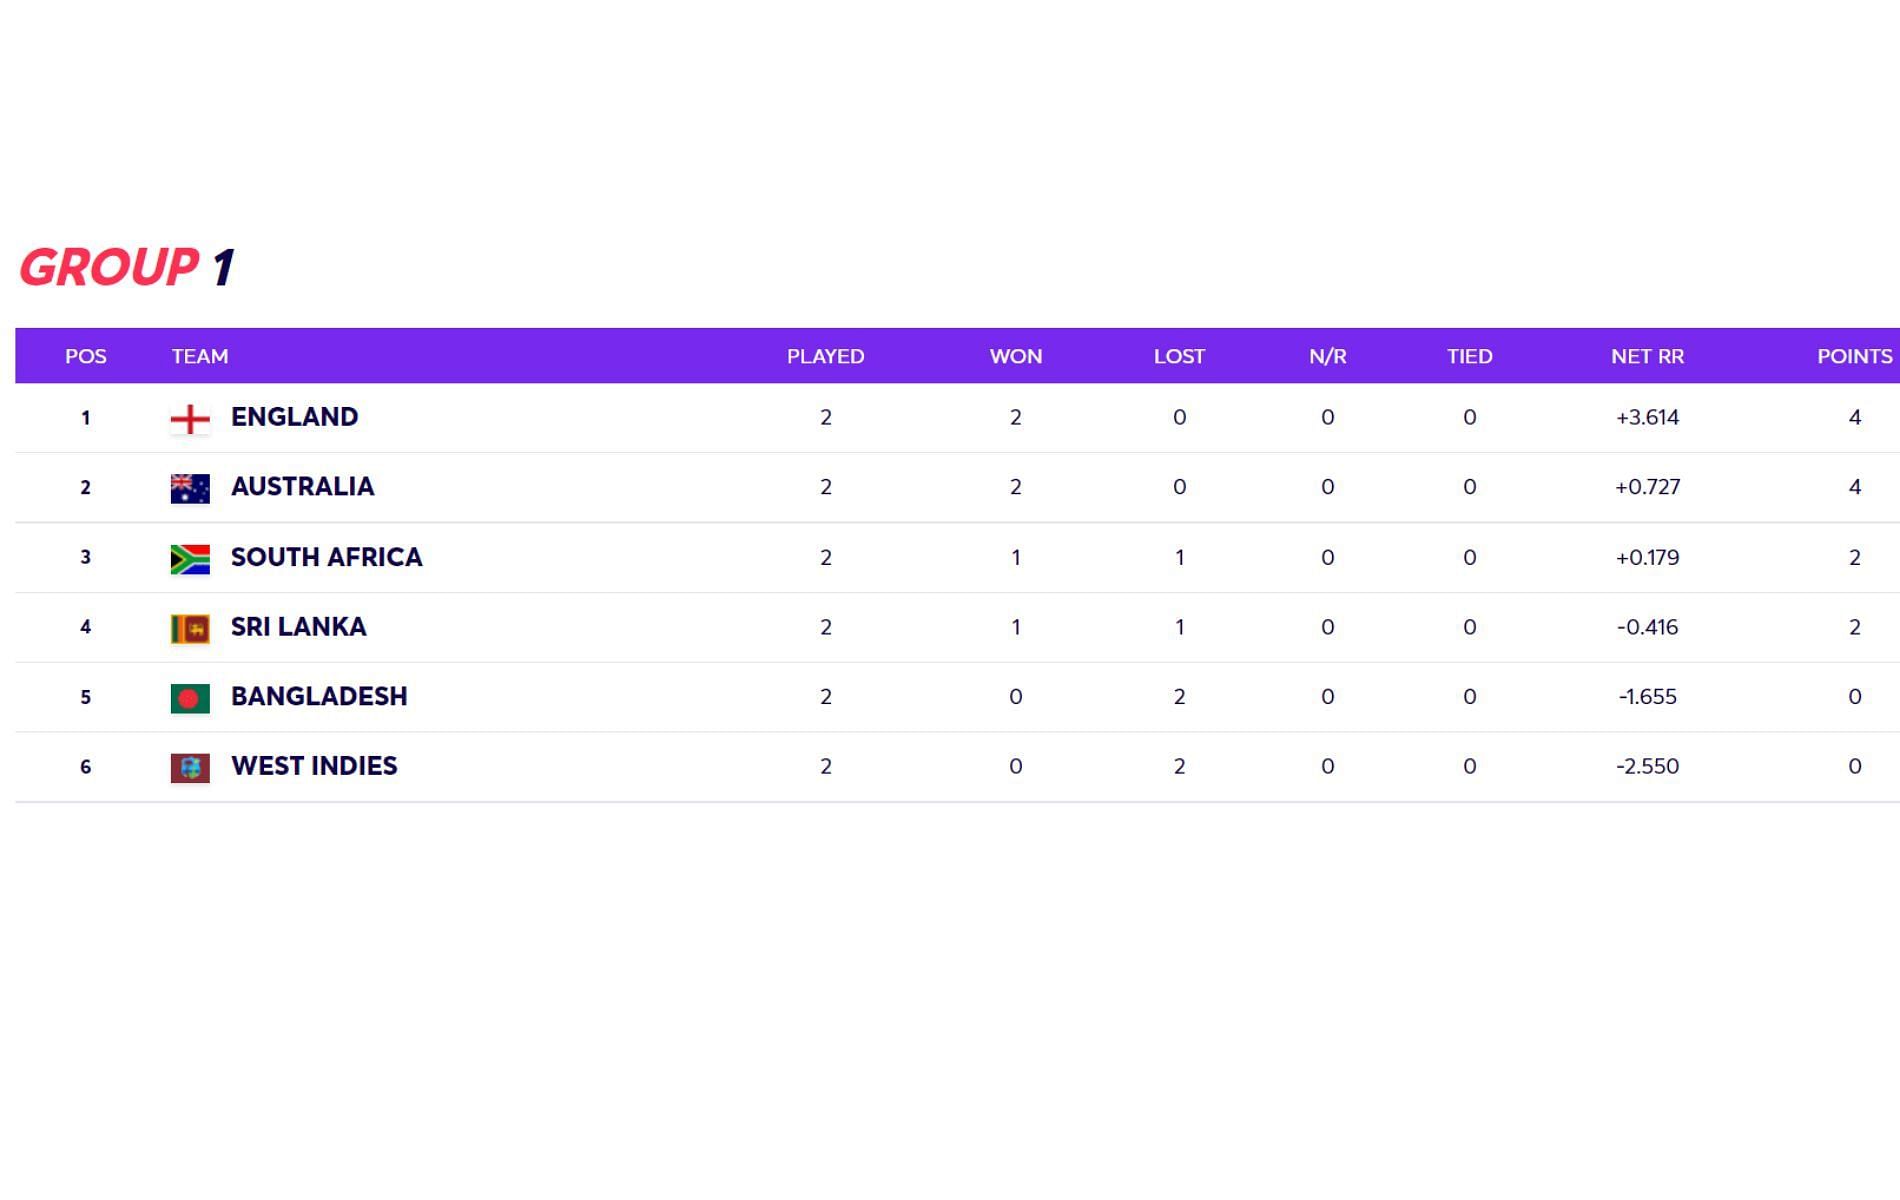 icc t20 world cup 2021 points table , how many teams from asia qualify for world cup